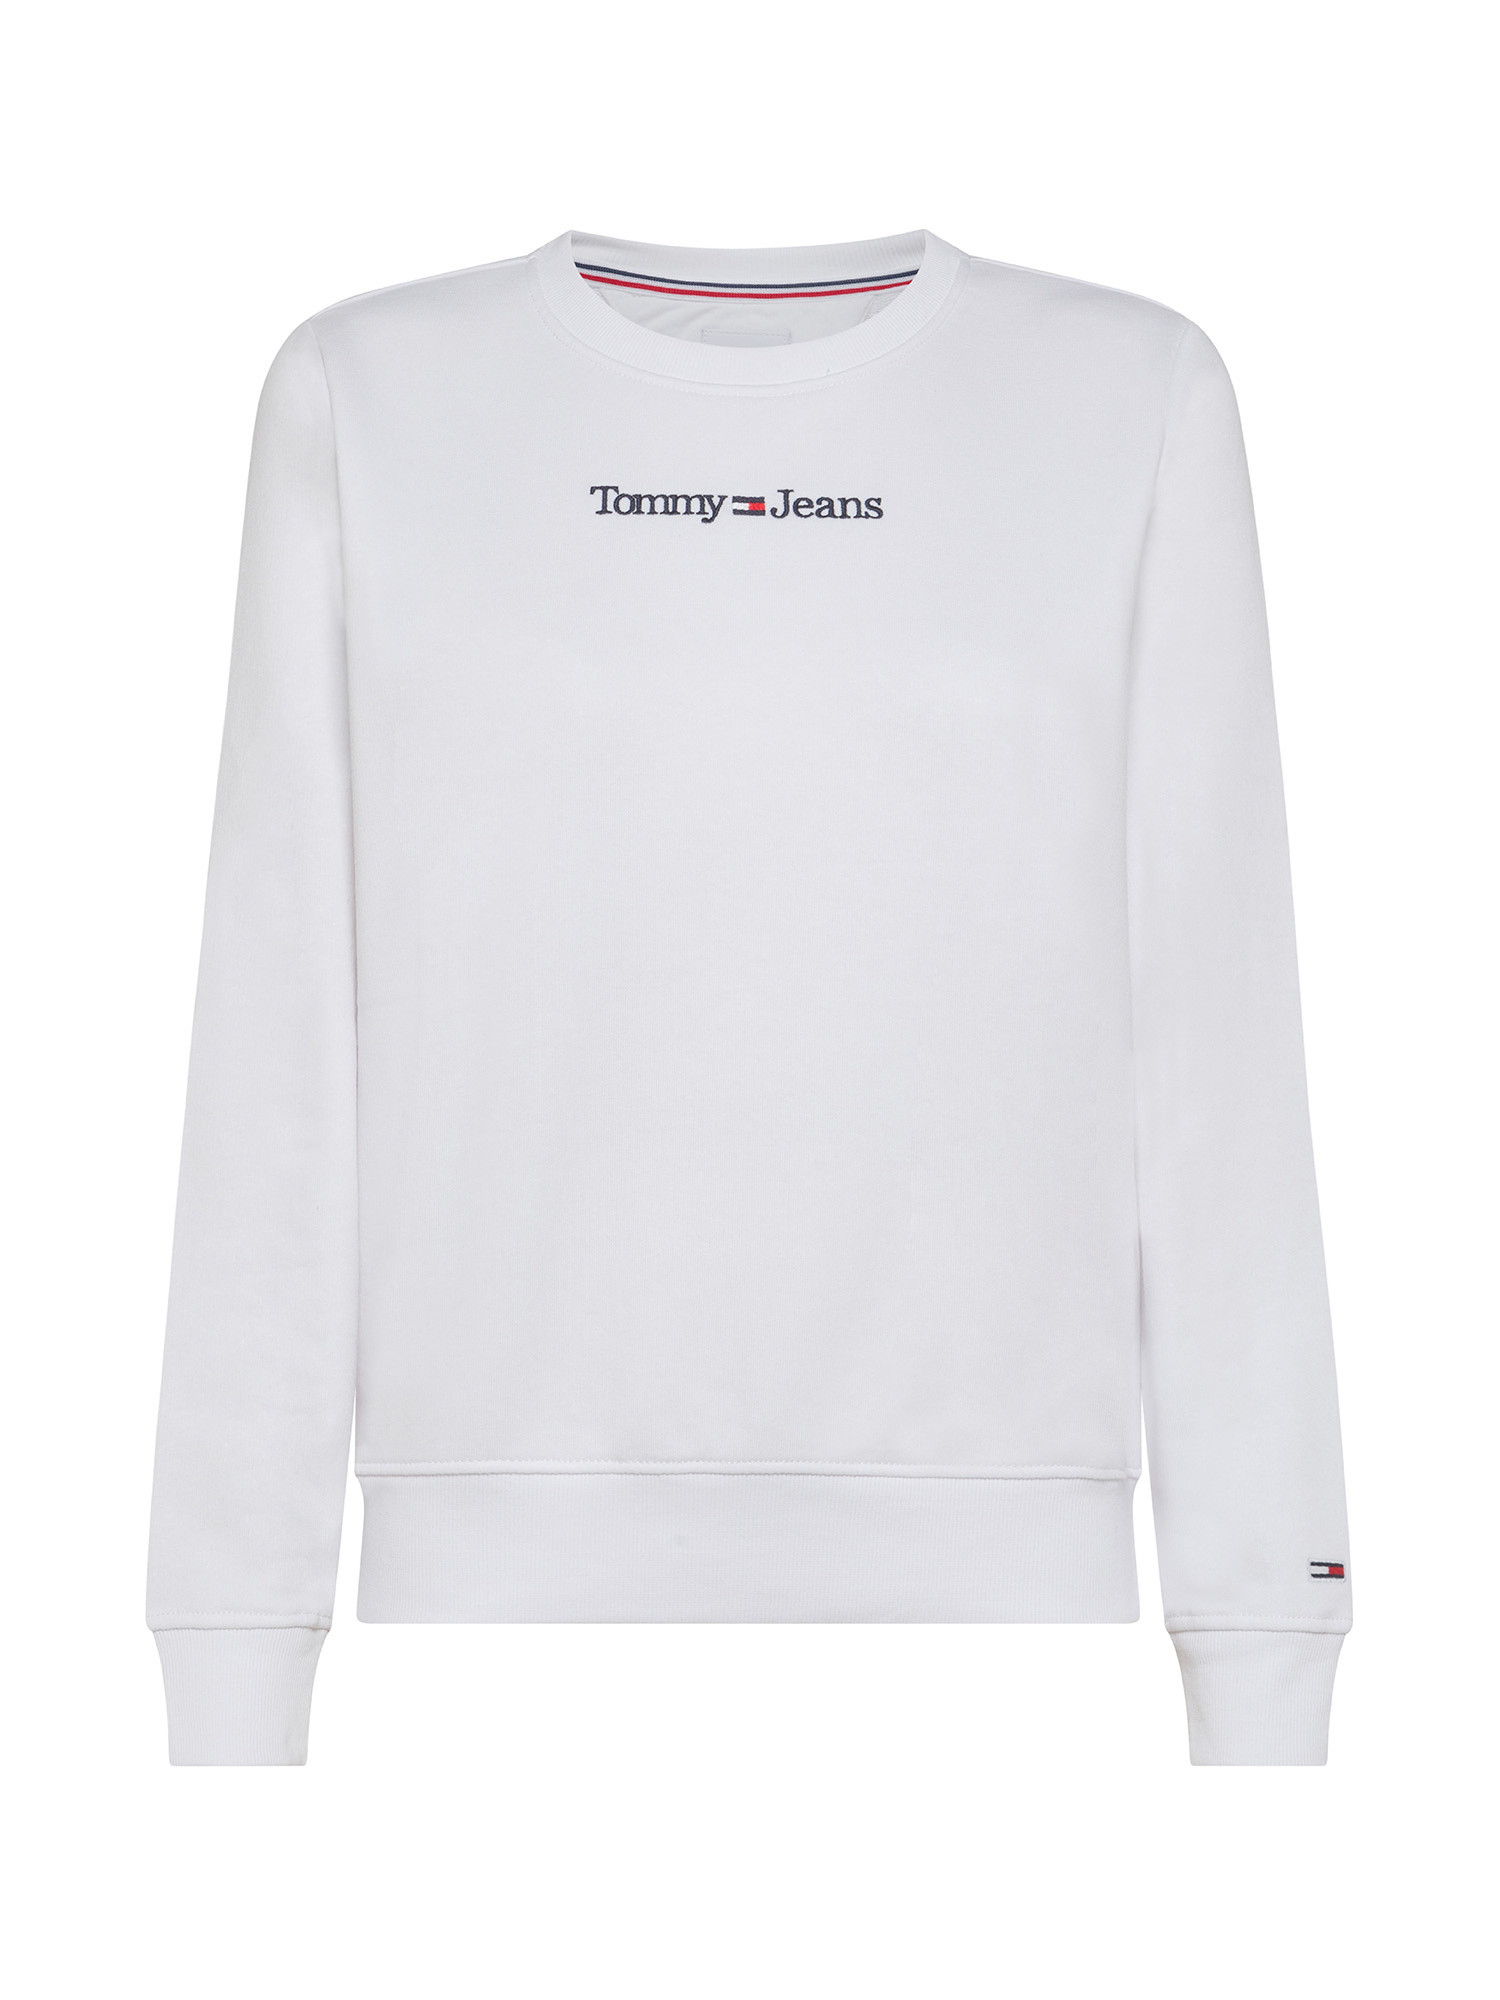 Tommy Jeans - Cotton crewneck sweatshirt with logo, White, large image number 0